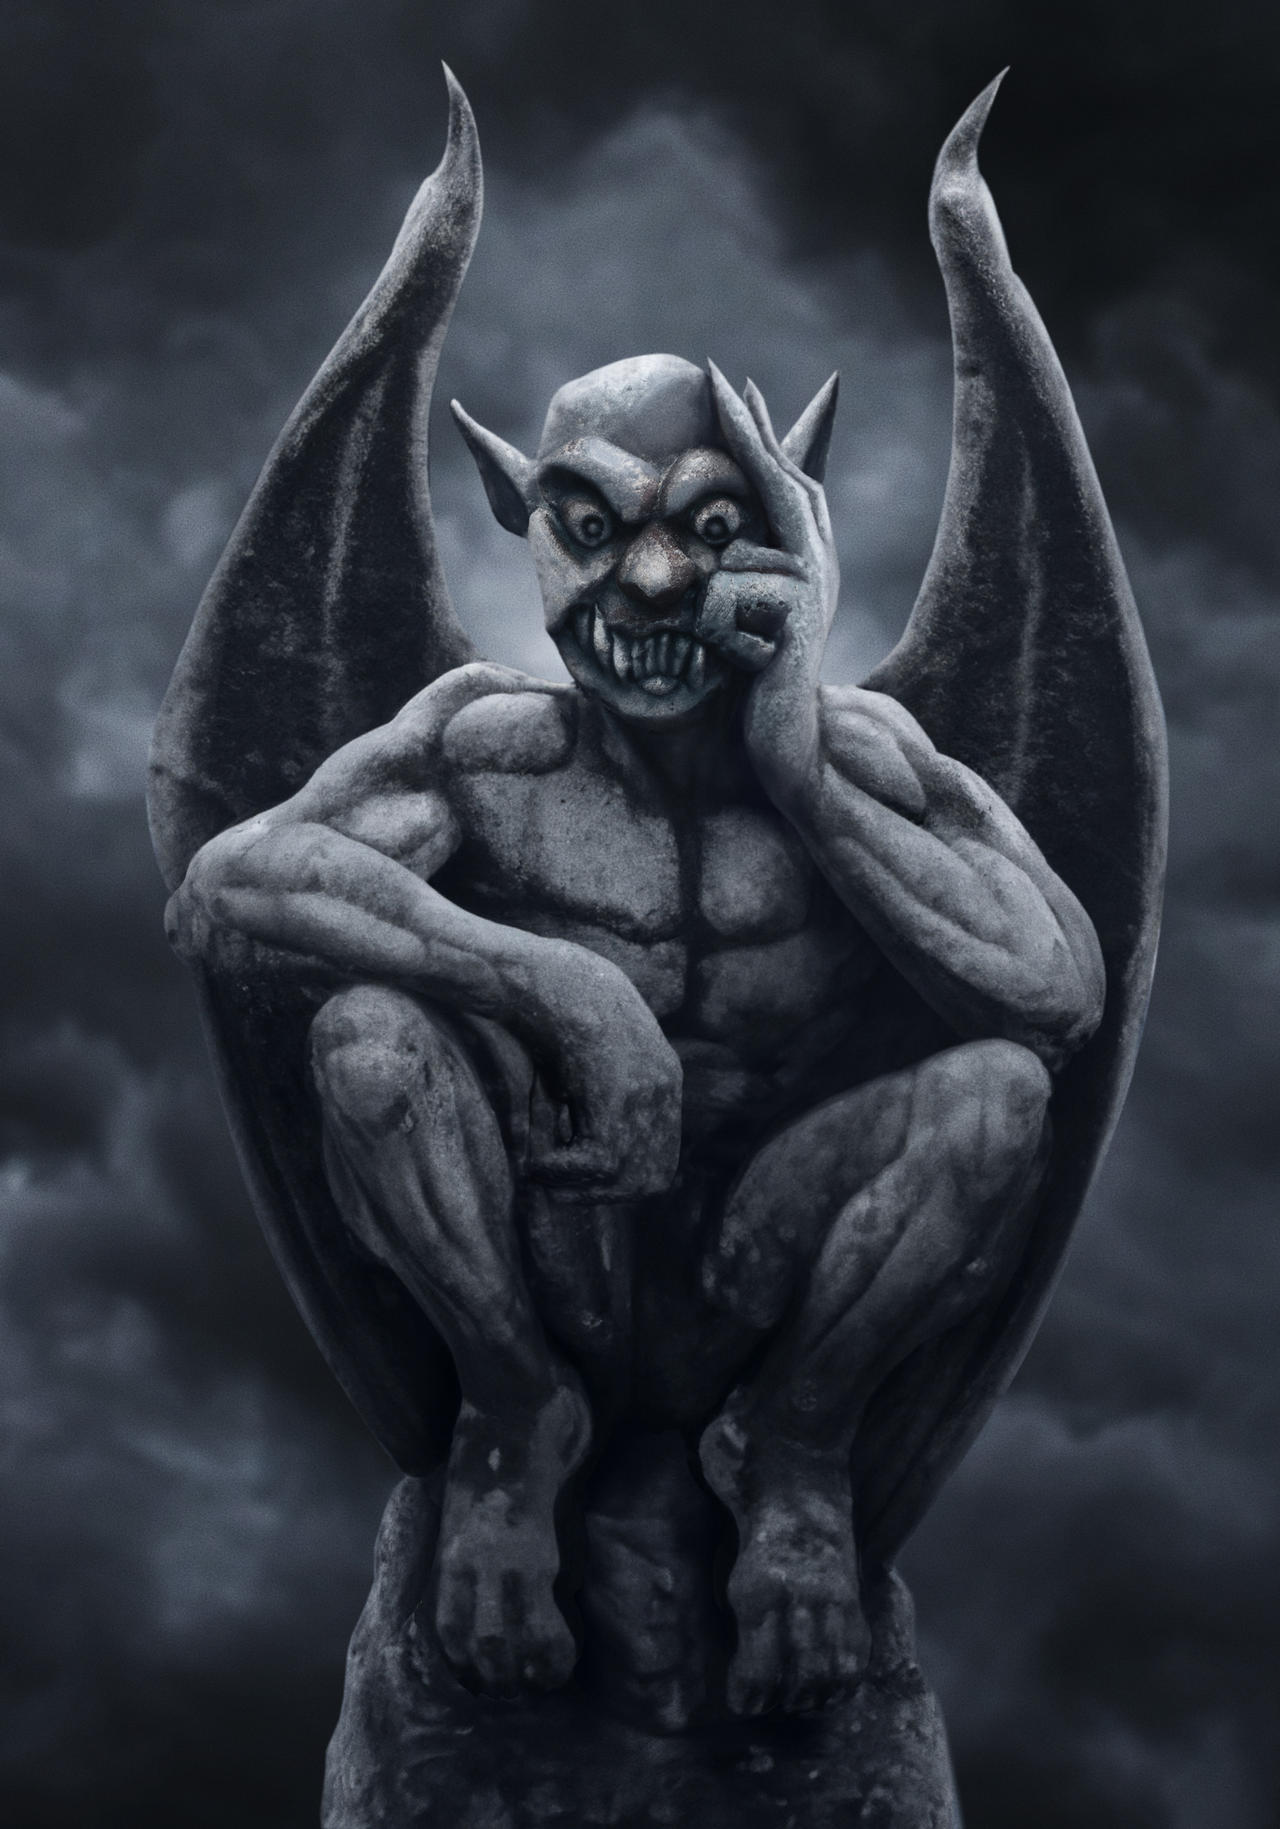 This Gargoyle Does Not Exist by Benjamin-the-Fox on DeviantArt